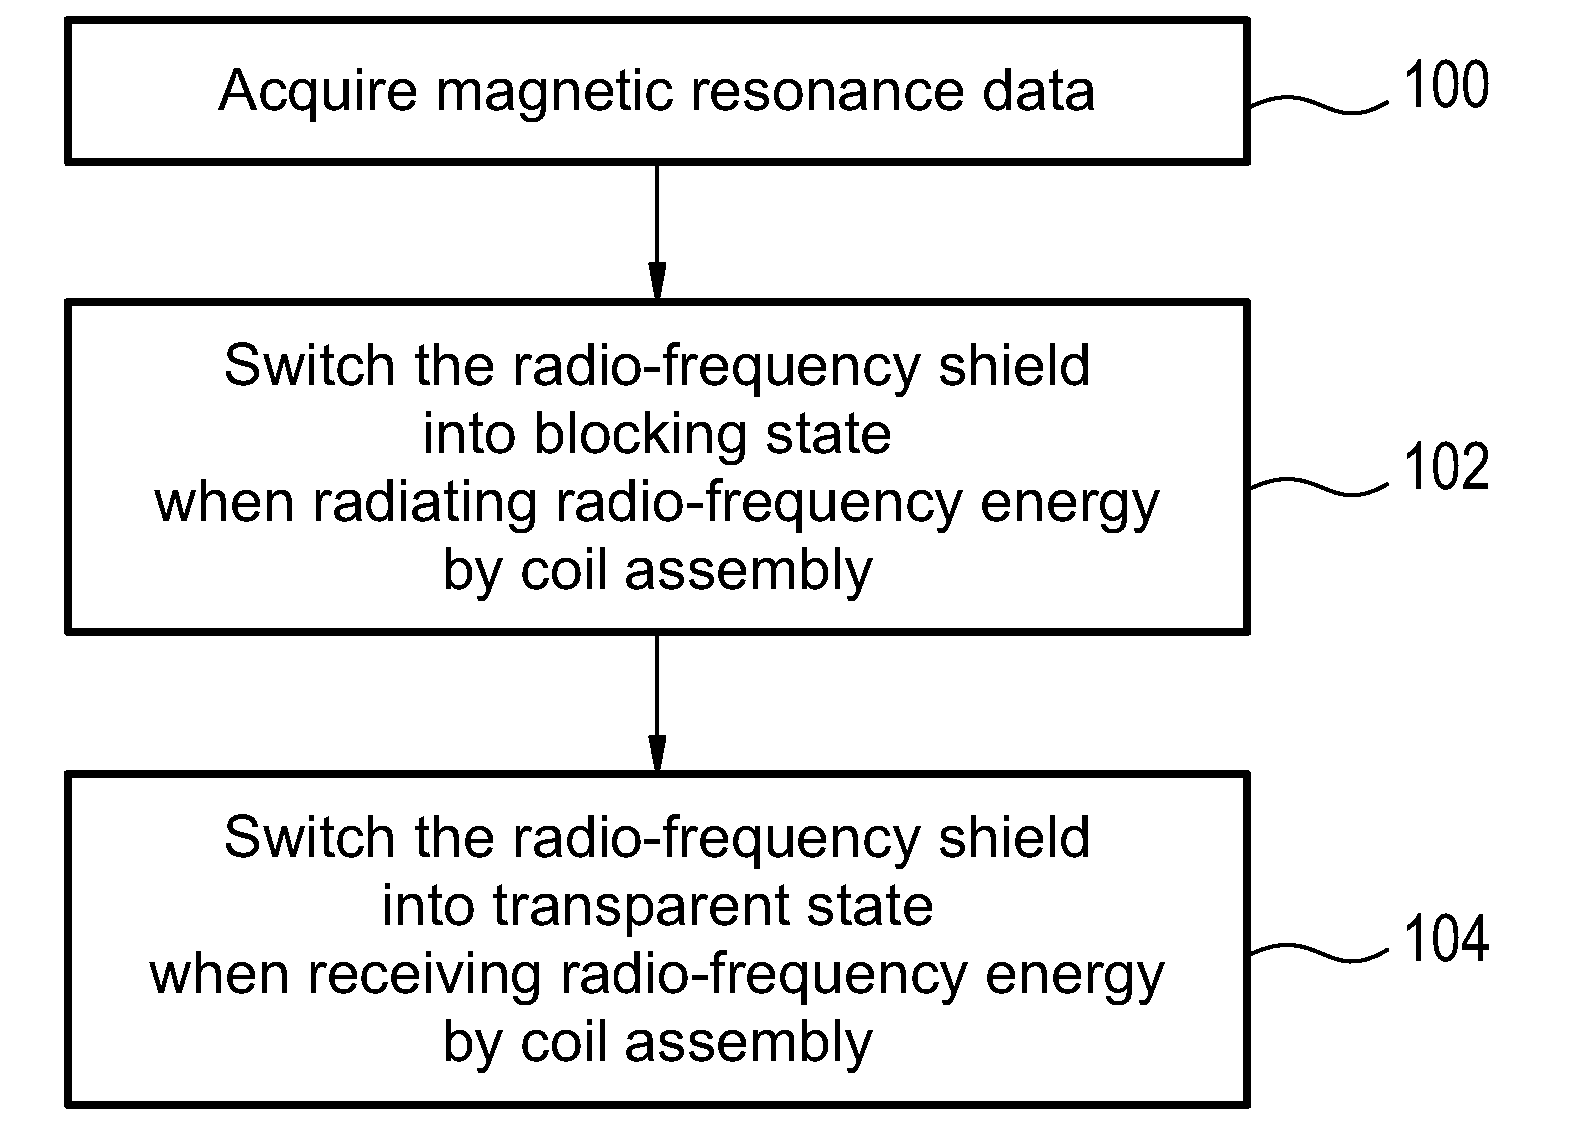 MRI coil assembly with a radio frequency shield switchable between a blocking state and a transparent state